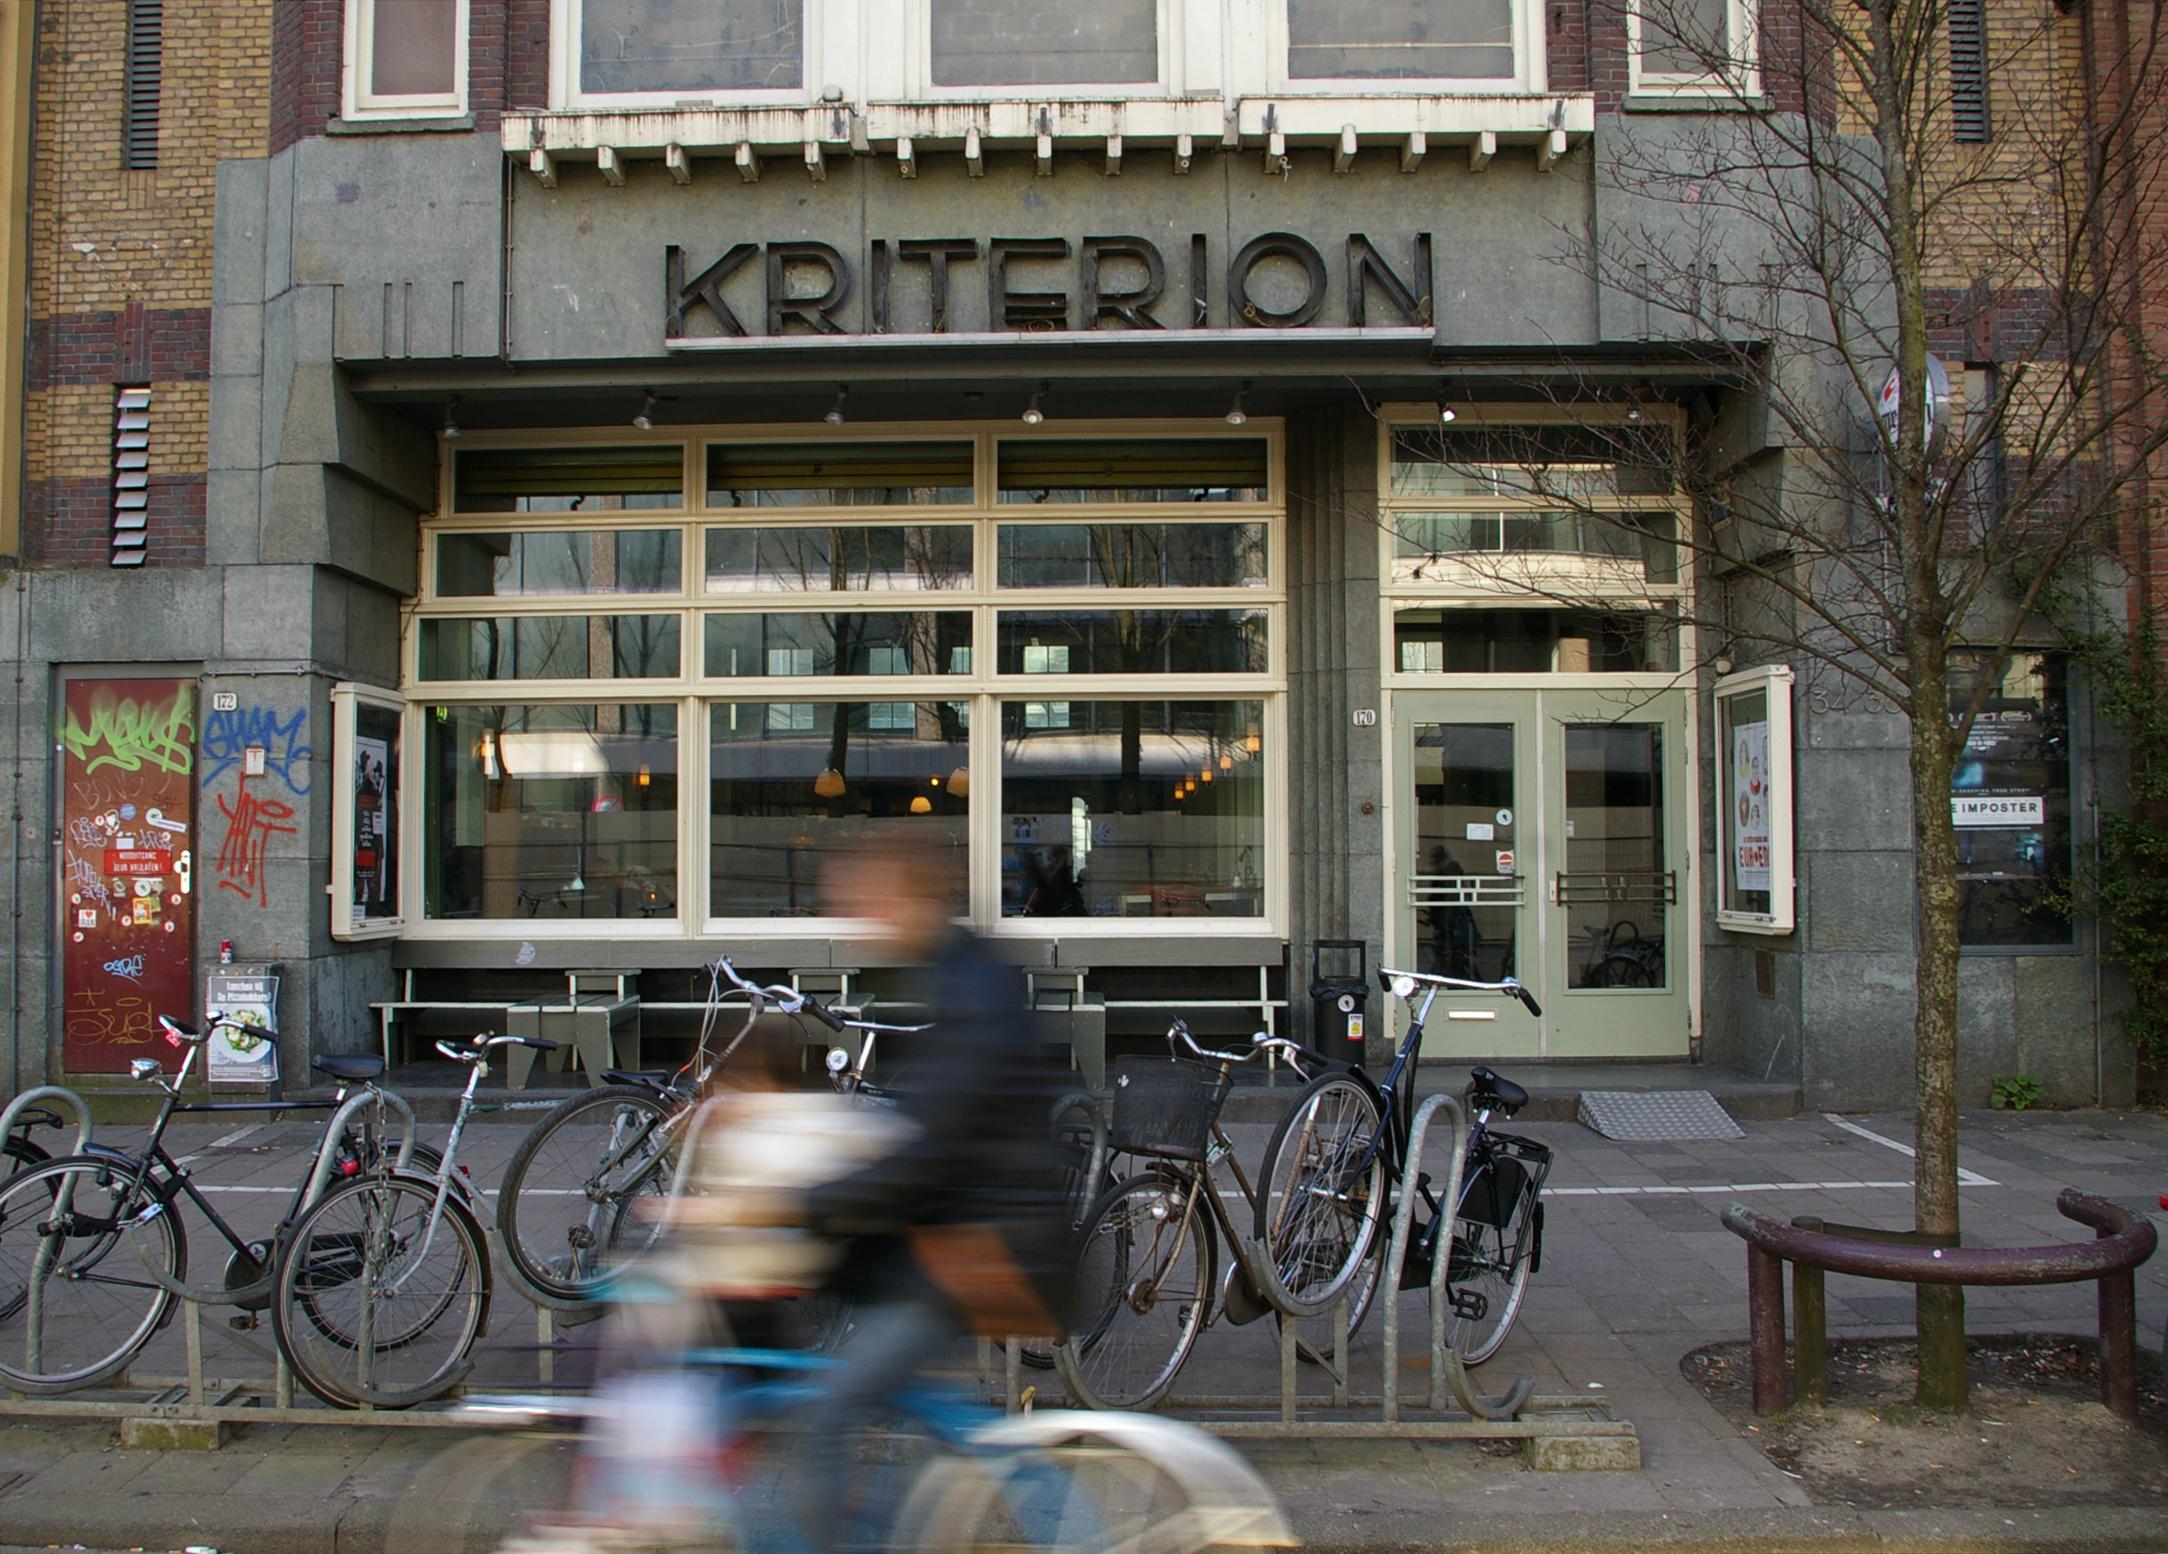 Cover image of this place Kriterion